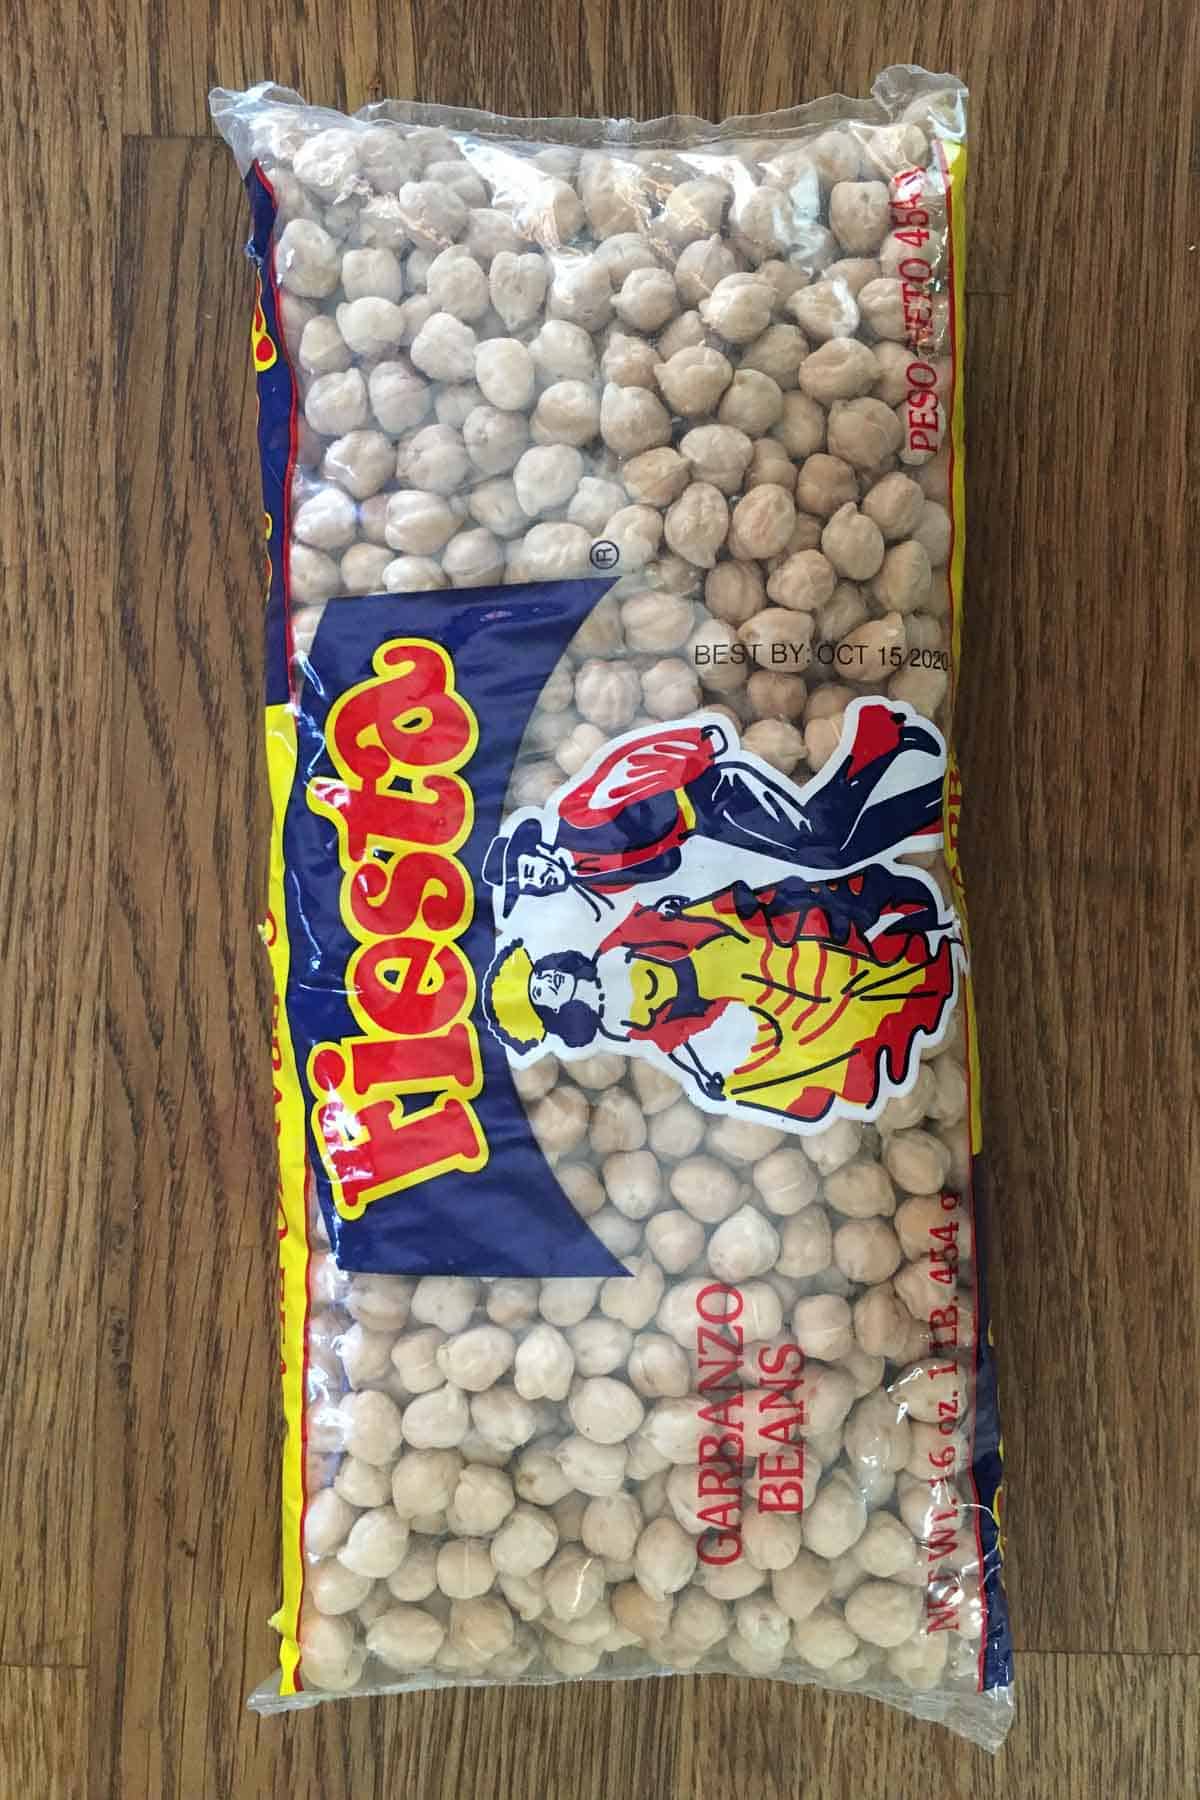 1 pound bag of dried chickpeas in package